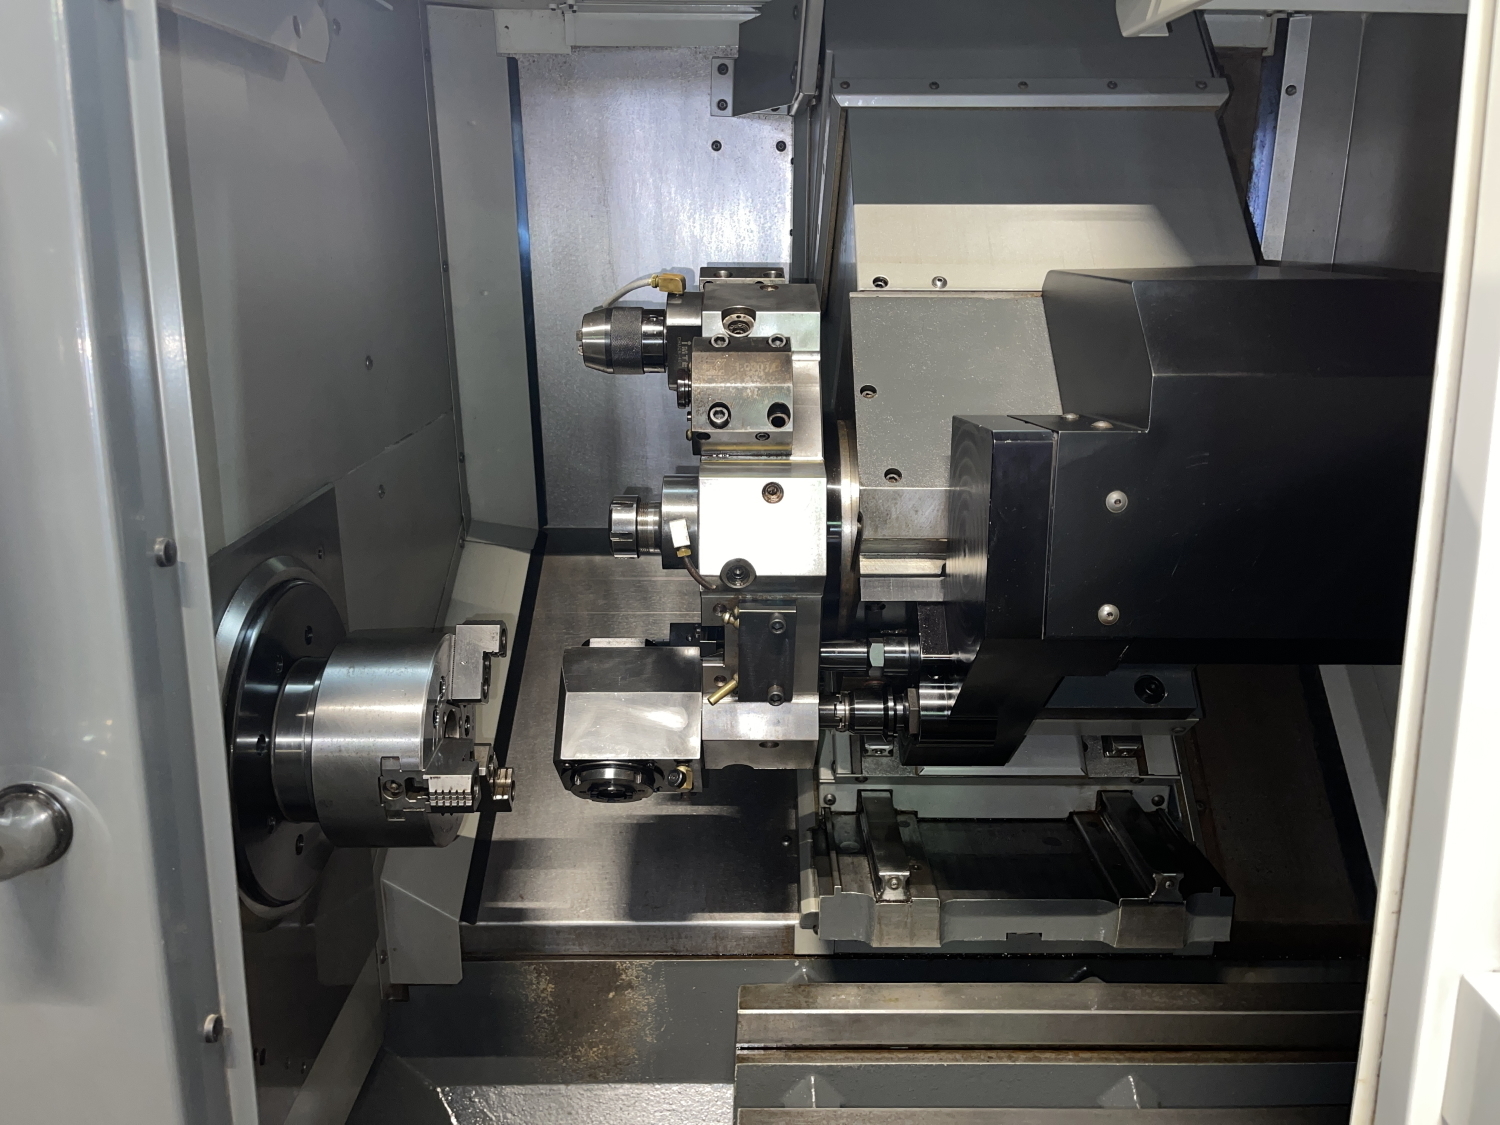 2015 HAAS ST-10Y CNC Lathes | RELCO MACHINERY